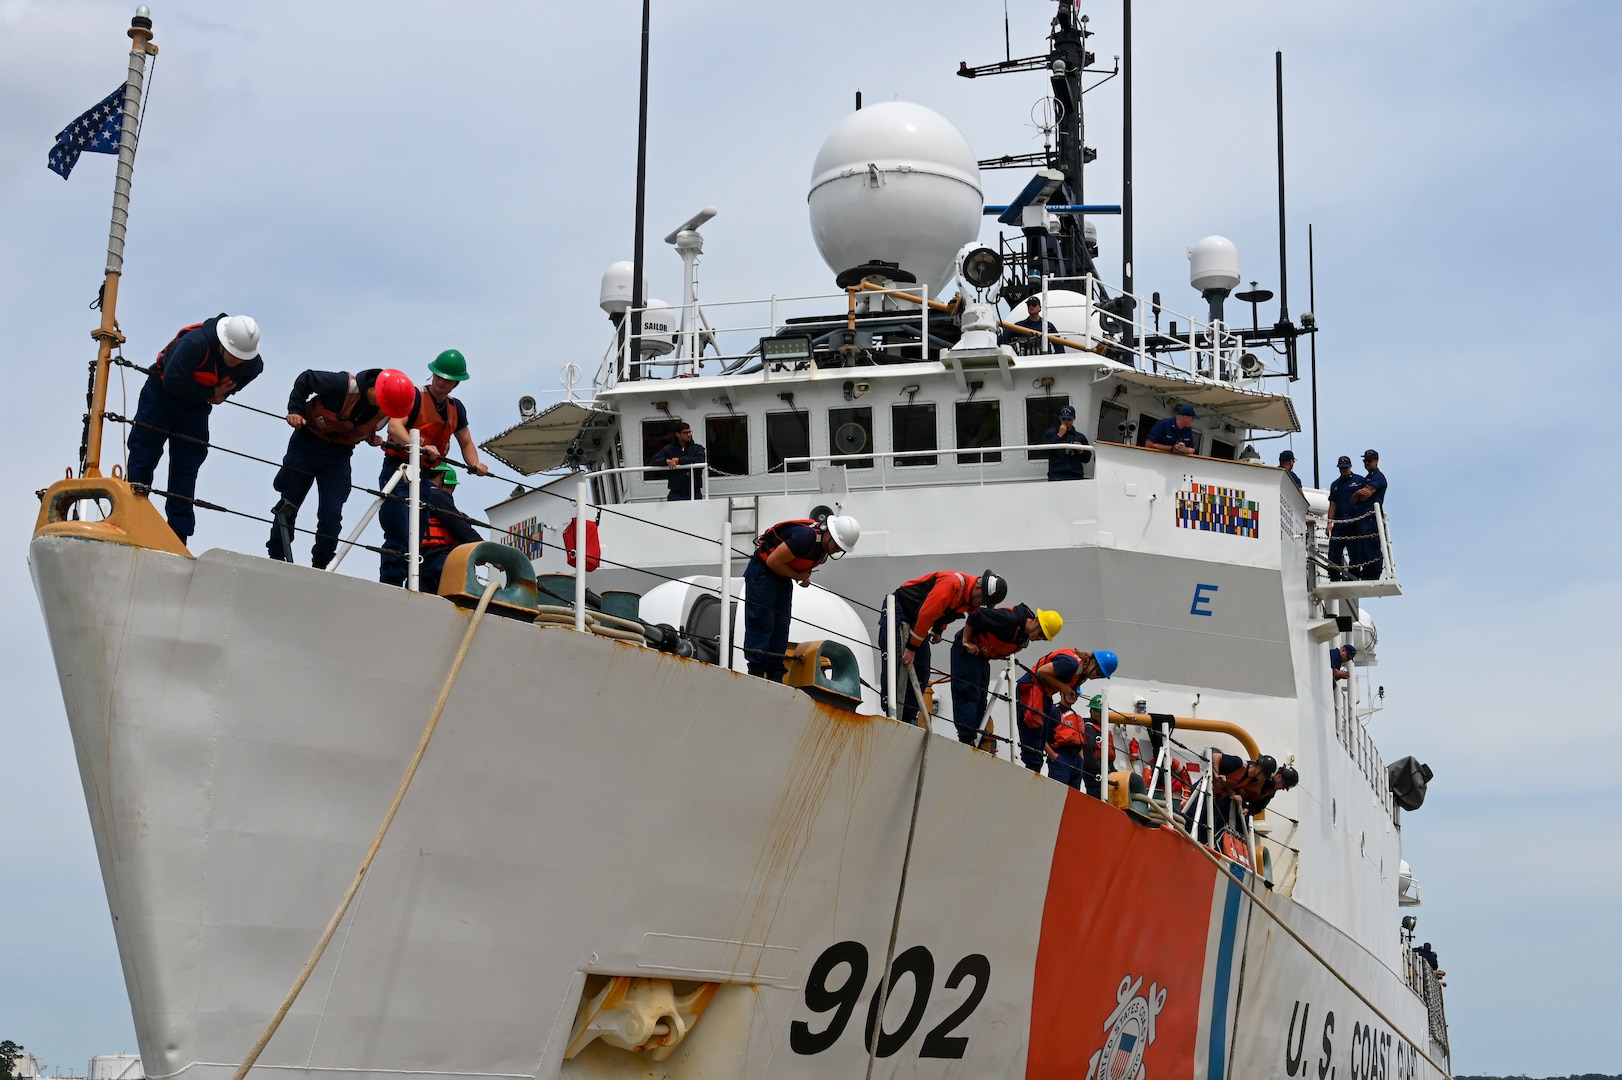 USCGC Tampa's (WMEC 902) crew moors up to the pier at the cutter's return to home port in Portsmouth, Virginia, April 26, 2023. Tampa returned home following an 88-day patrol in the Florida Straits and Caribbean Sea. (U.S. Coast Guard photo by Petty Officer 3rd Class Kate Kilroy)